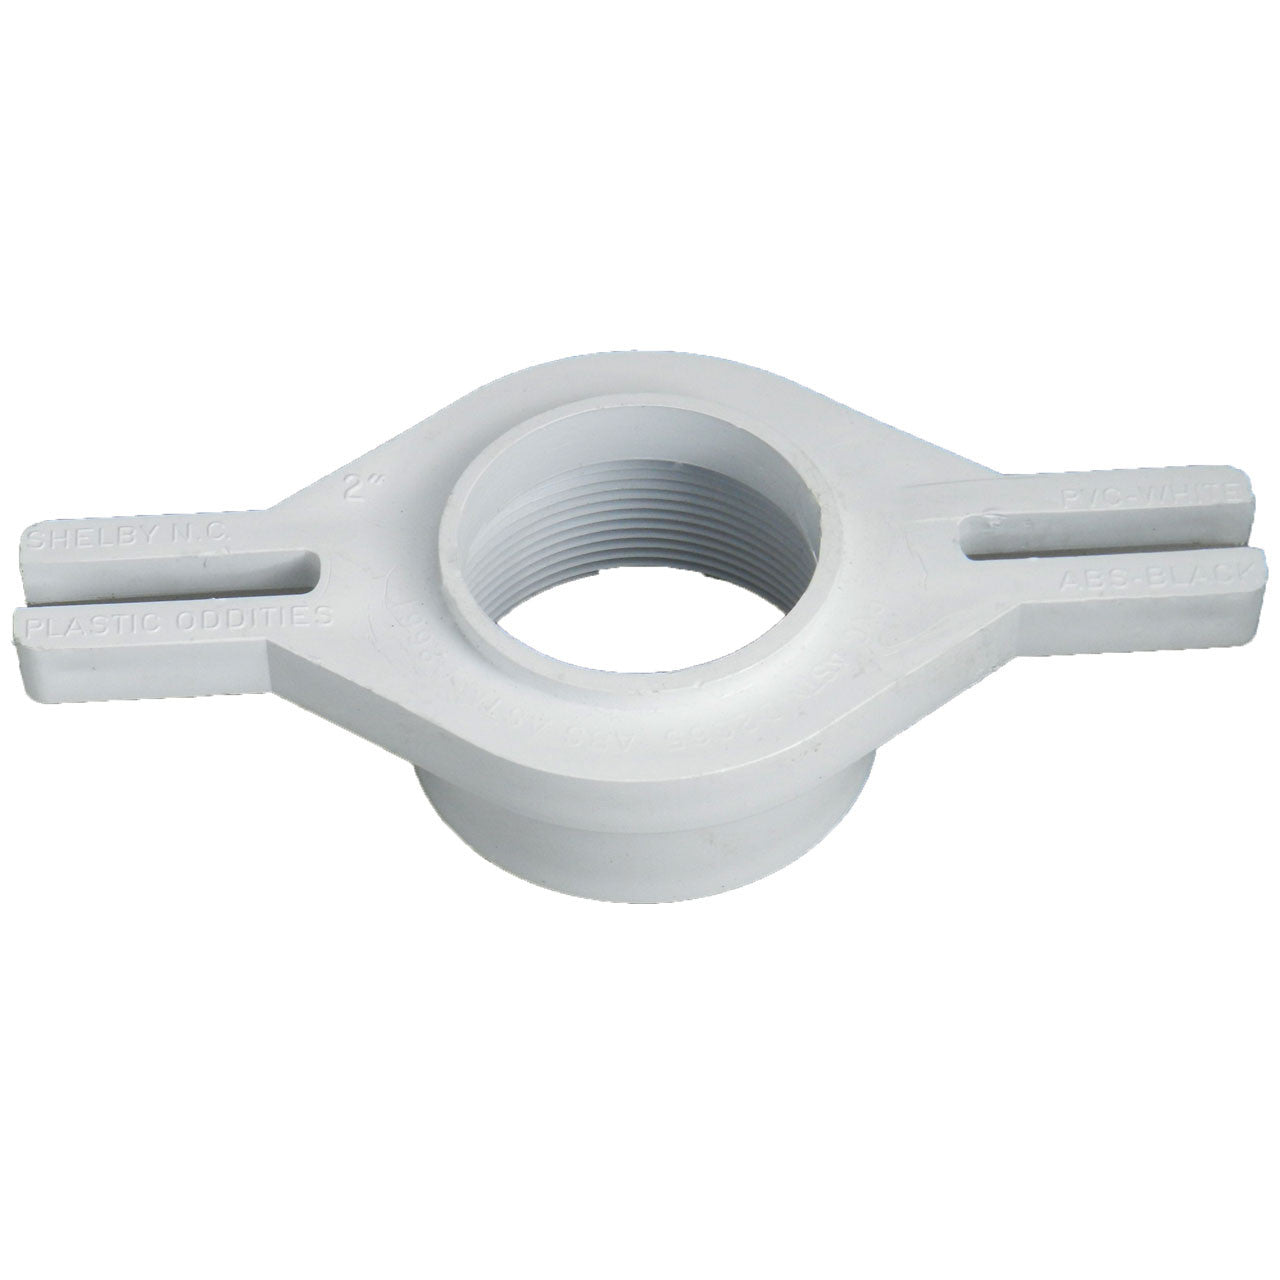 Specialty Plastic Urinal Flange